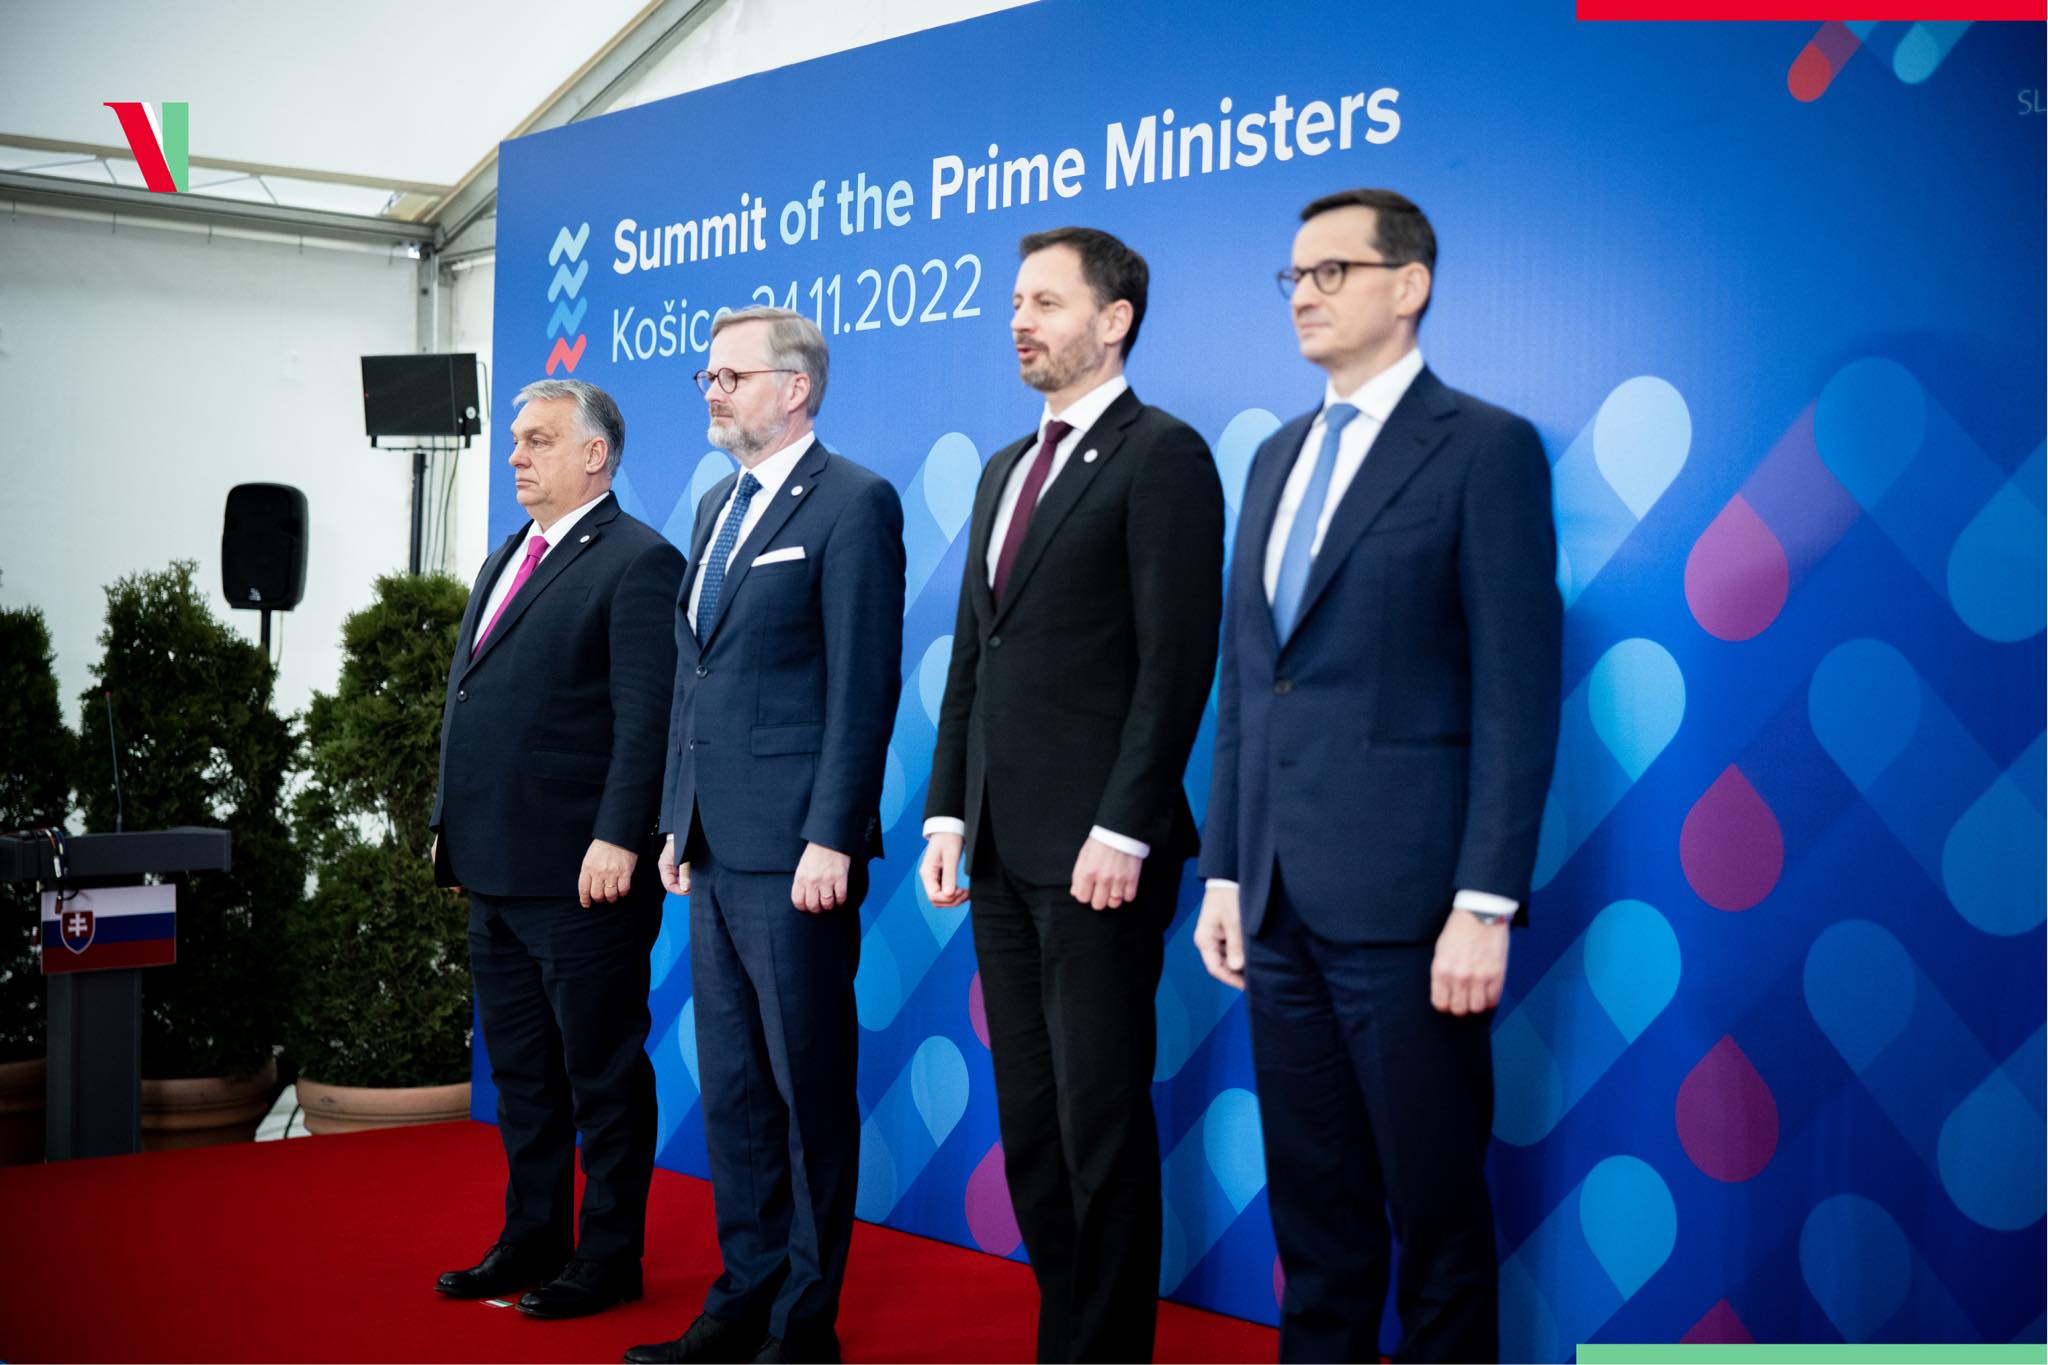 Visegred Group Prime Ministers